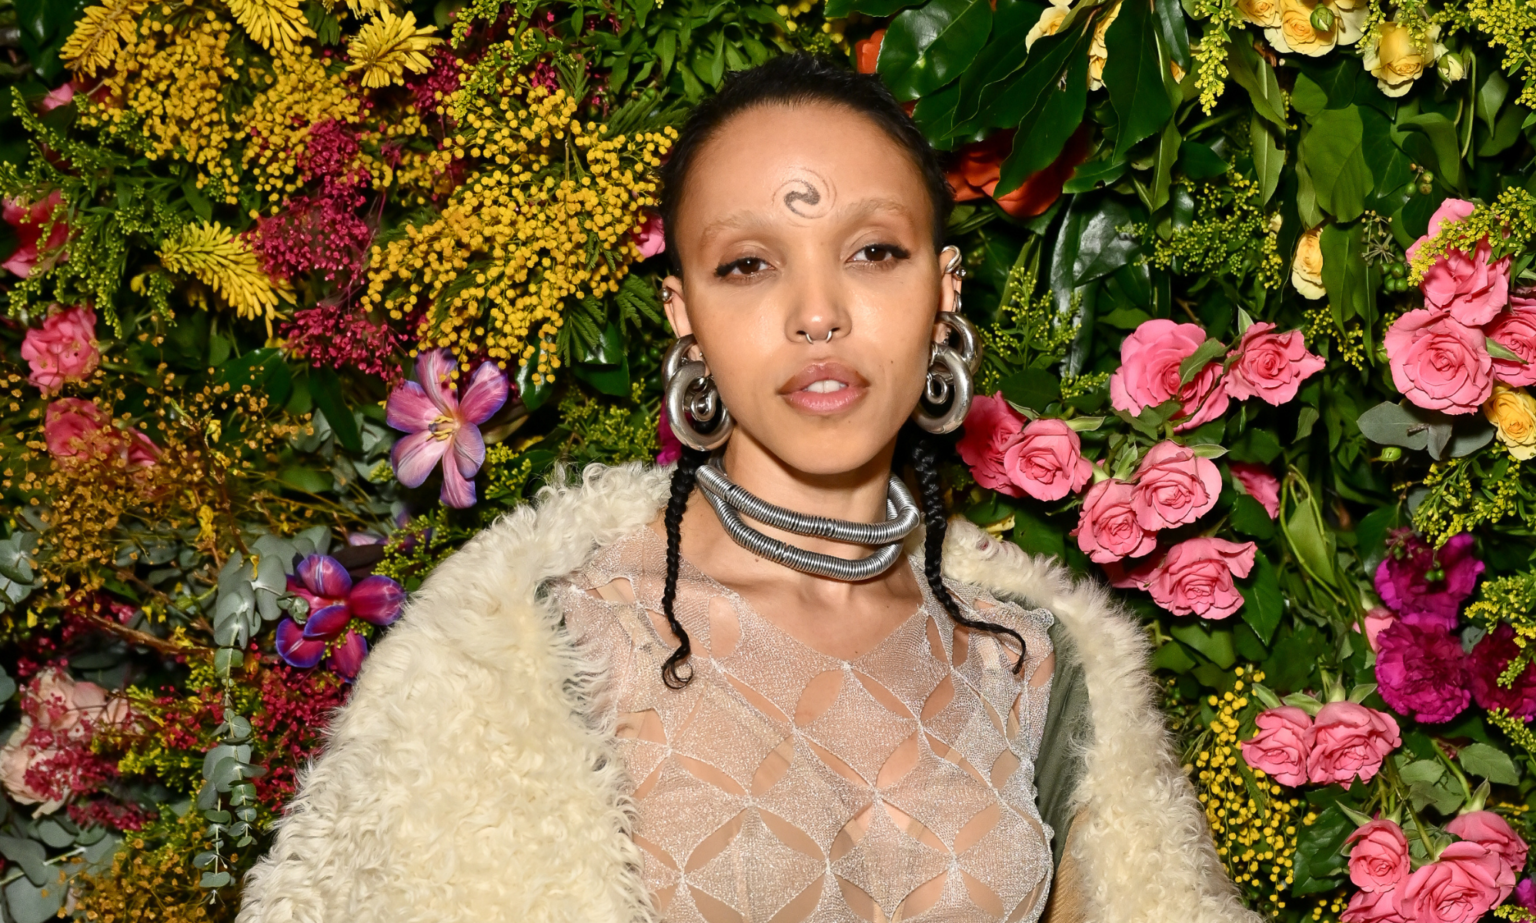 The ban on FKA twigs’ Calvin Klein advert has been lifted – but only partially